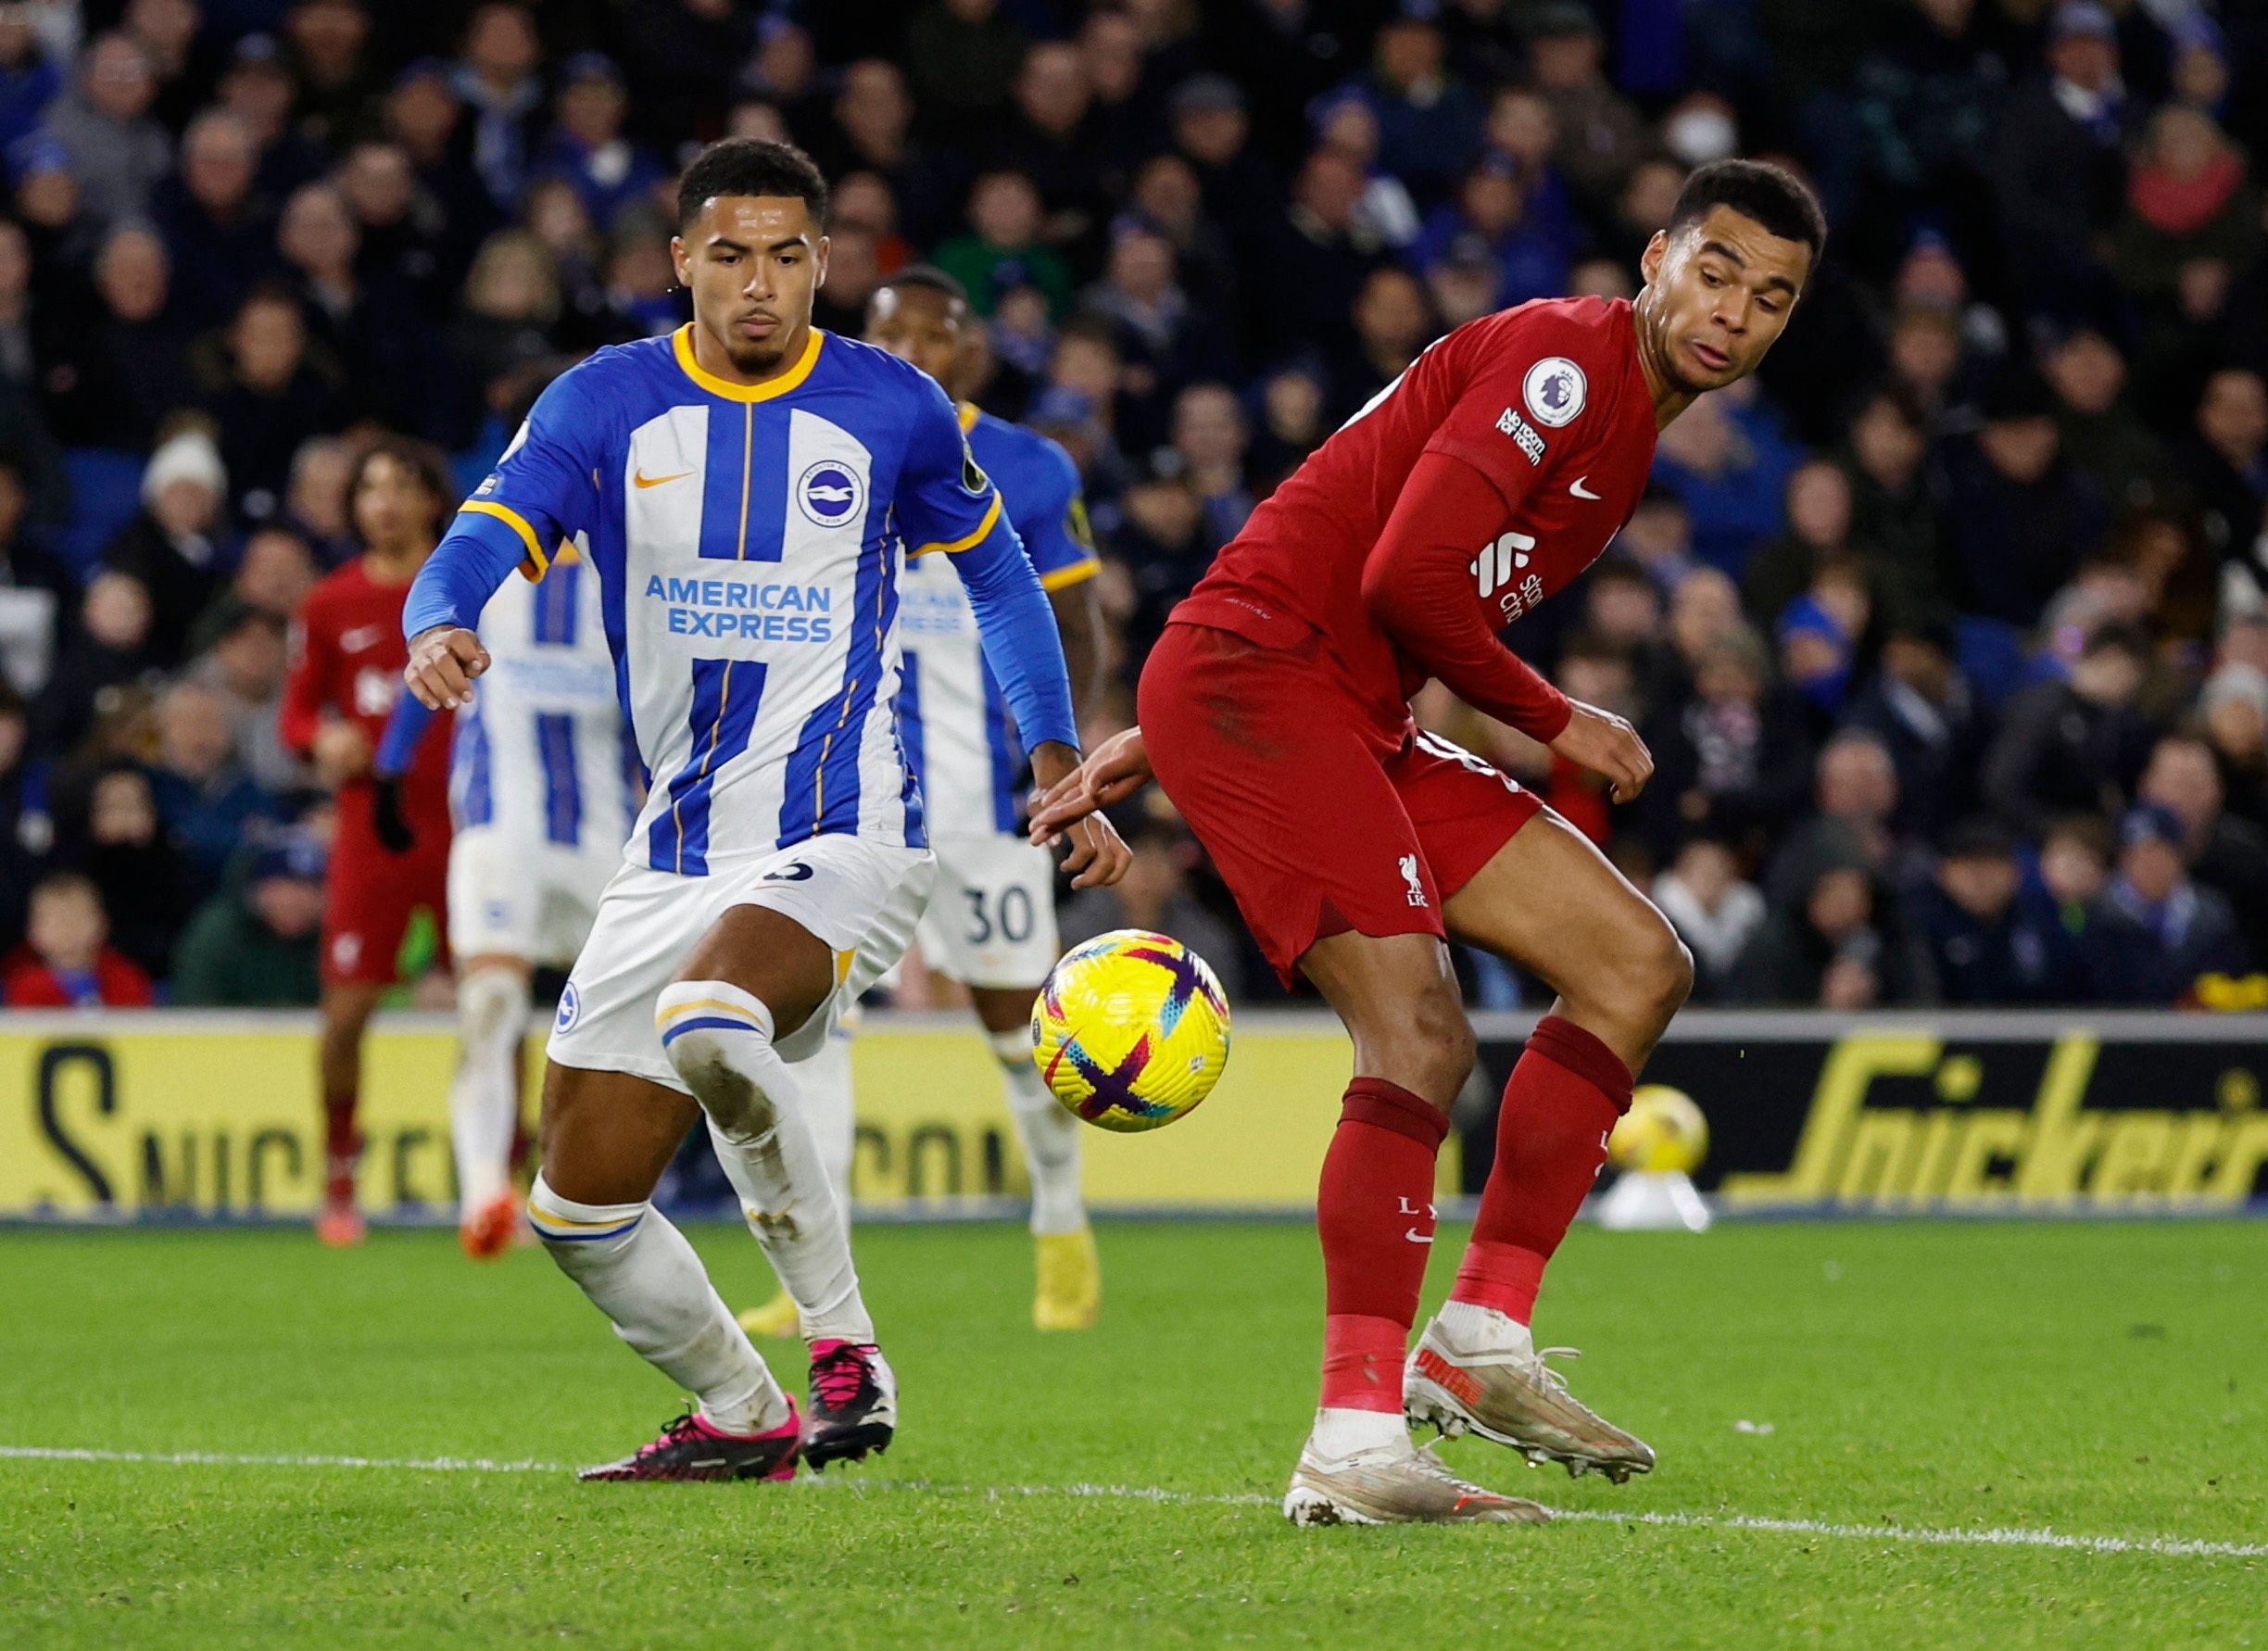 Soccer Football - Premier League - Brighton &amp; Hove Albion v Liverpool - The American Express Community Stadium, Brighton, Britain - January 14, 2023 Liverpool's Cody Gakpo in action with Brighton &amp; Hove Albion's Levi Colwill Action Images via Reuters/Andrew Couldridge EDITORIAL USE ONLY. No use with unauthorized audio, video, data, fixture lists, club/league logos or 'live' services. Online in-match use limited to 75 images, no video emulation. No use in betting, games or single club /le